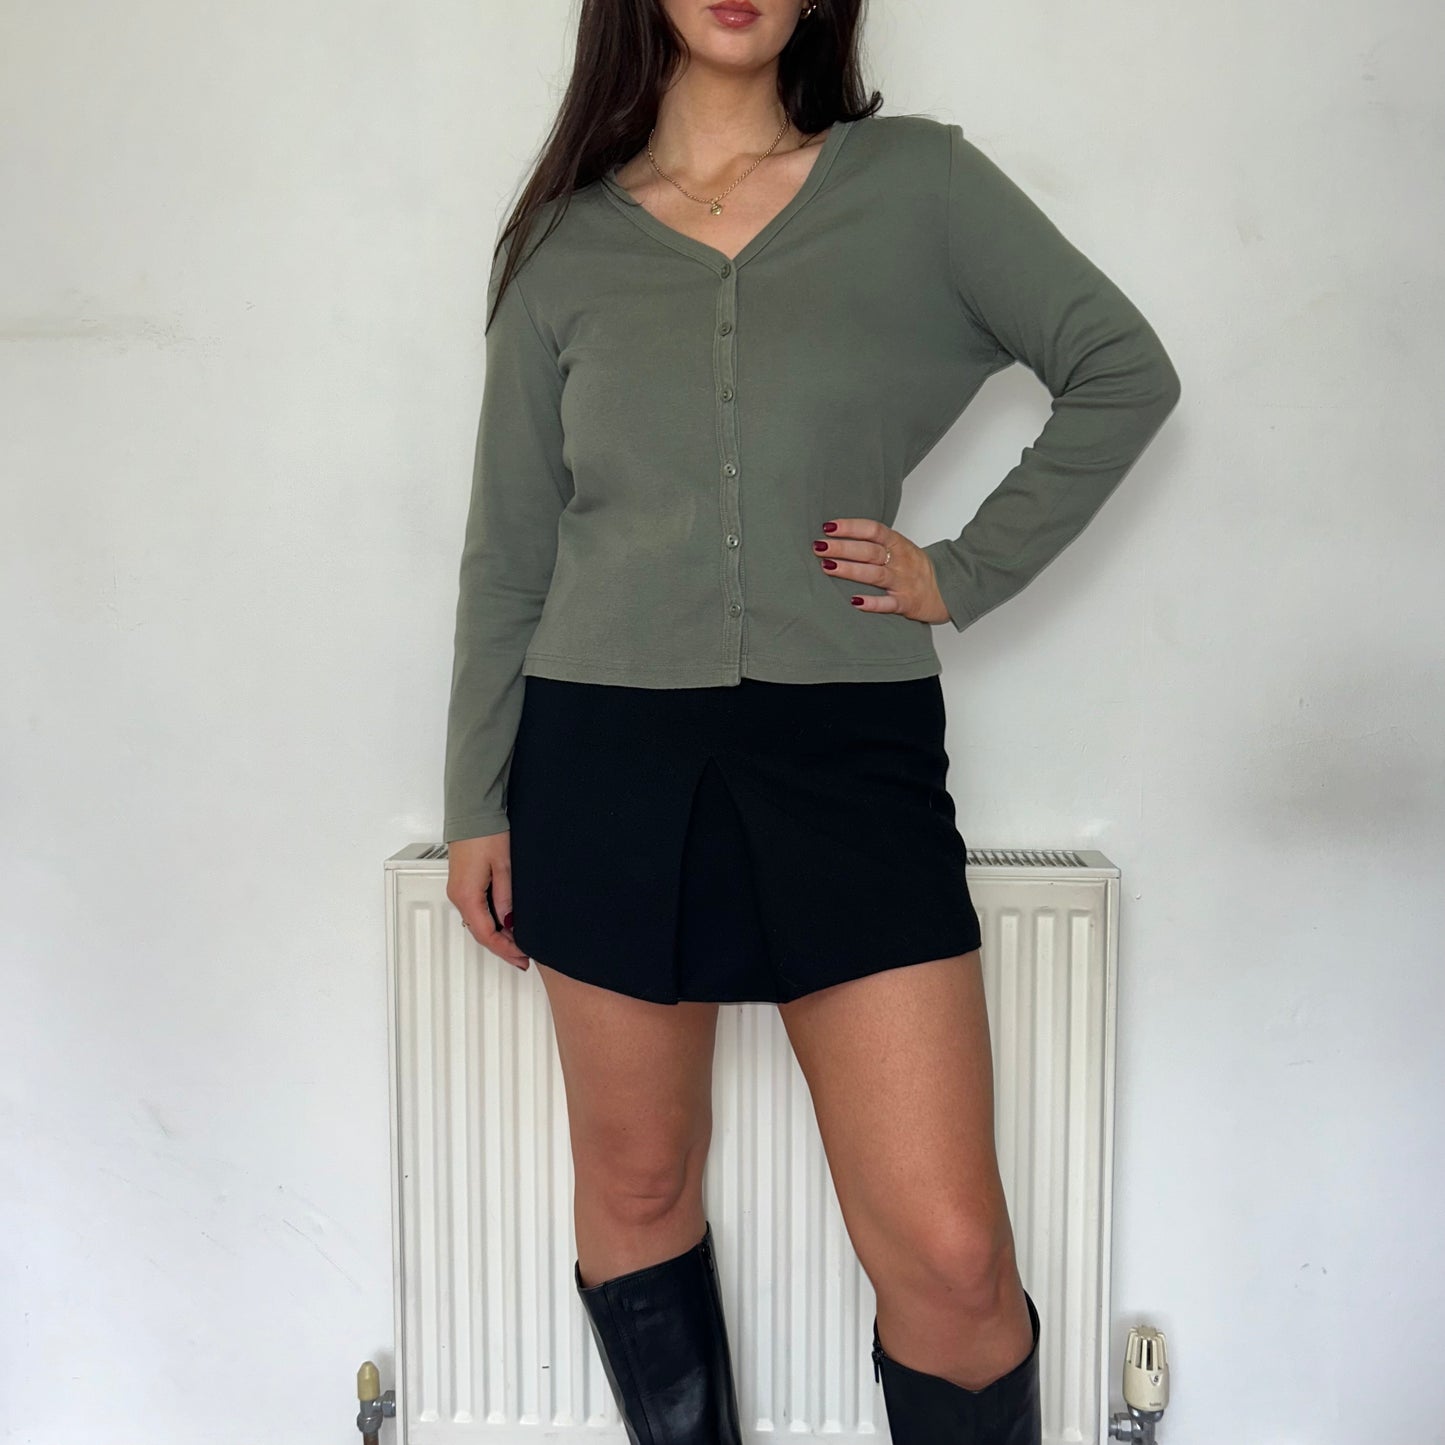 green button up long sleeve top shown on a model wearing a black skirt and black boots